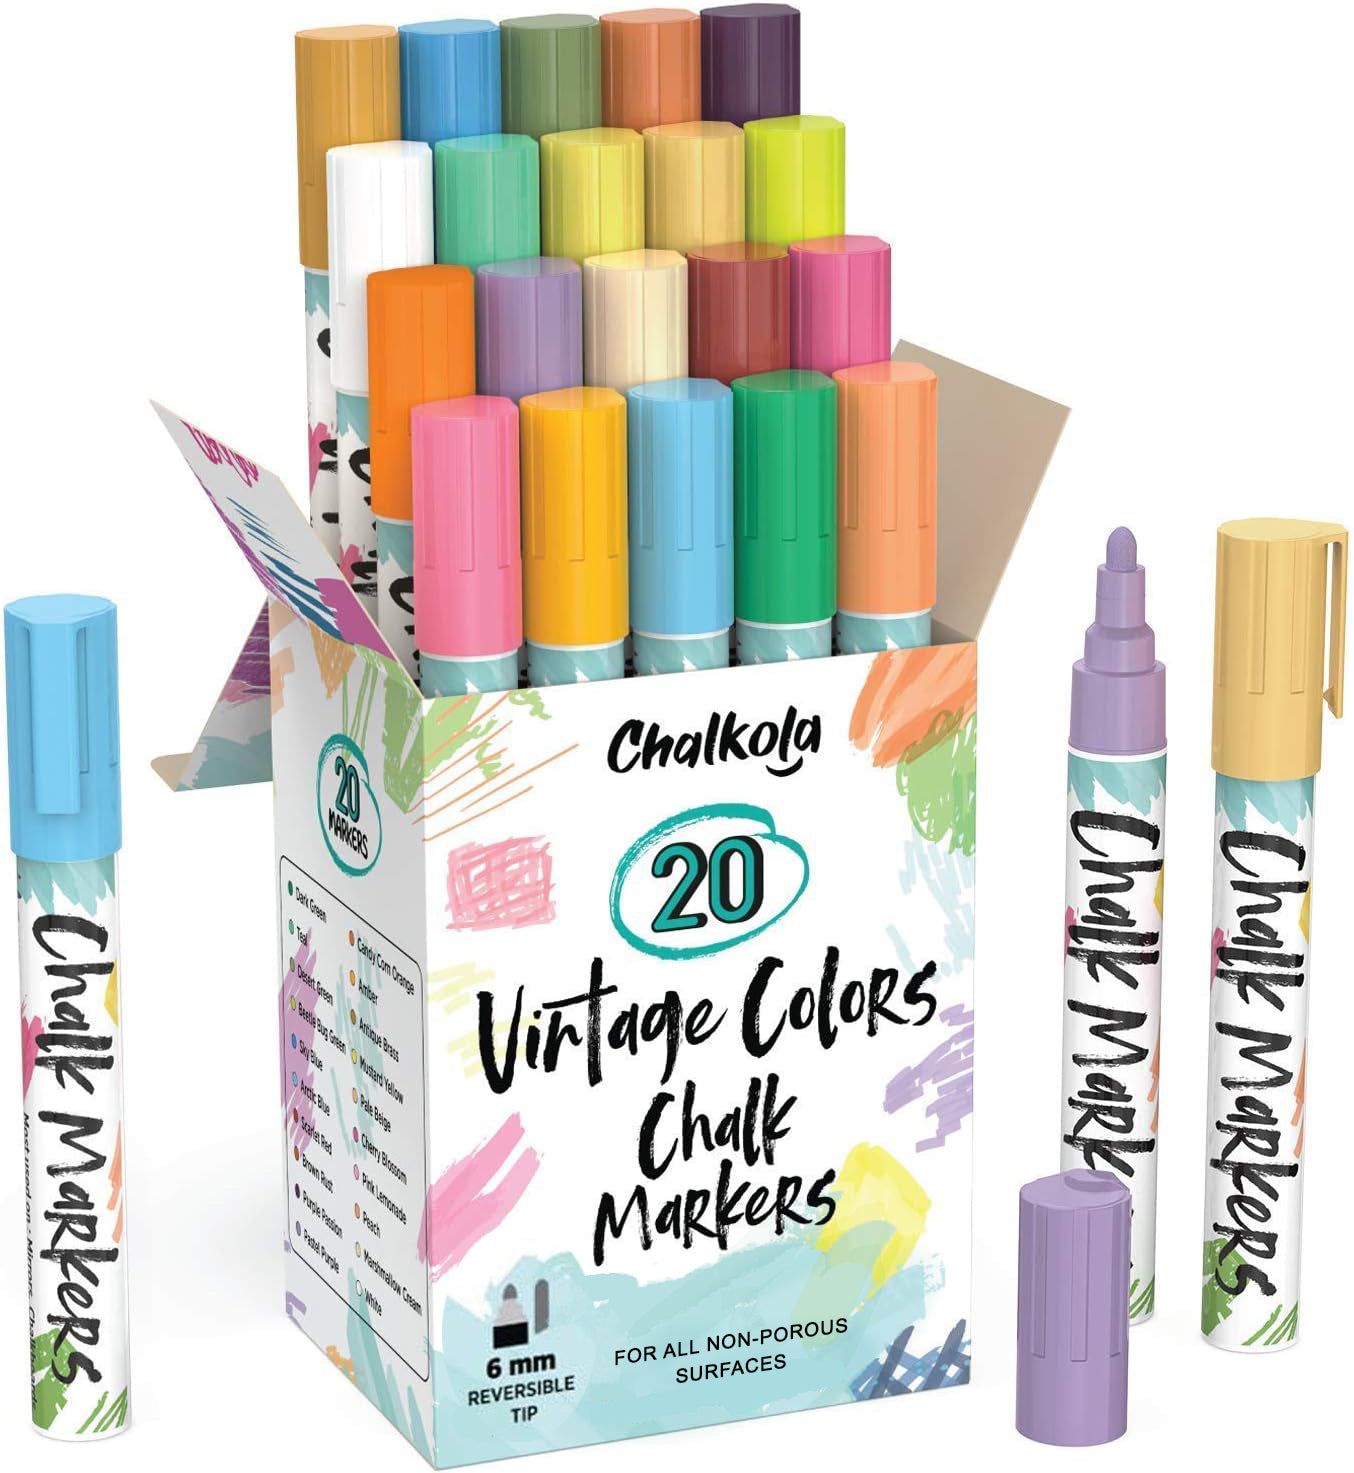 Chalkola Chalk Markers Review & Giveaway » Coffee & Vanilla